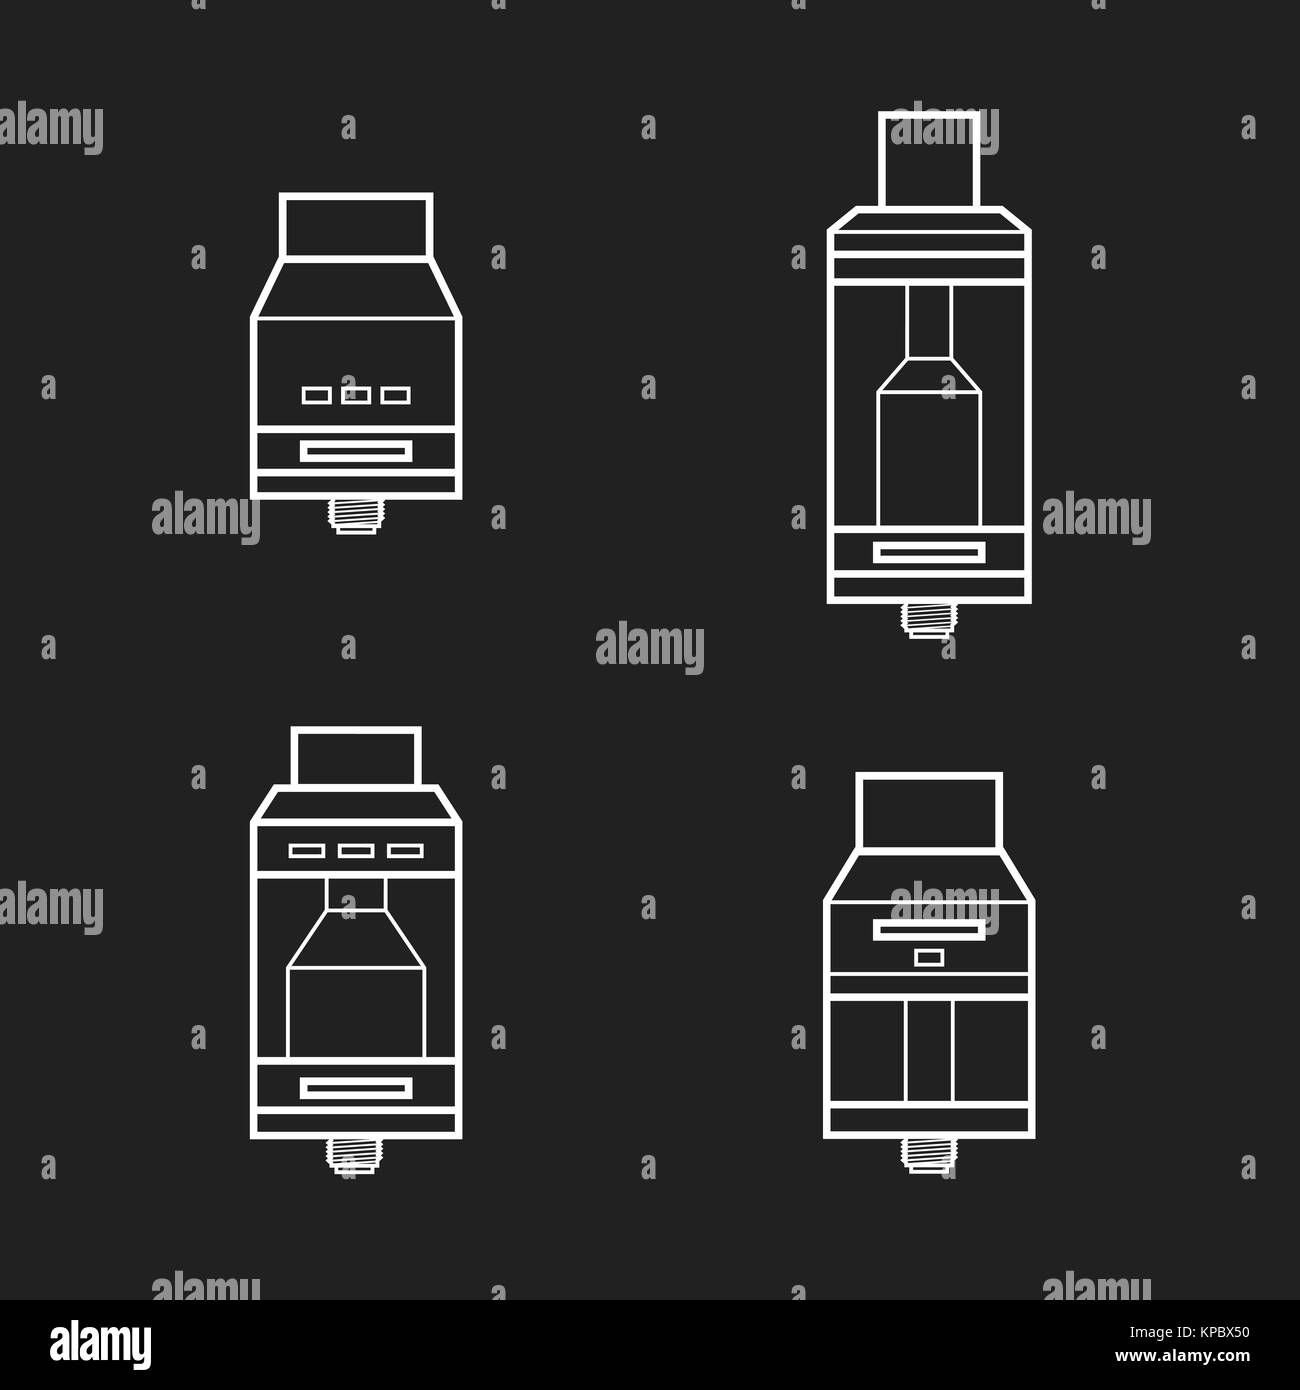 vector white monochrome outline illustrations various rebuildable drip and tank vape atomizers types RDA RDTA RBA RTA isolated on black background Stock Vector